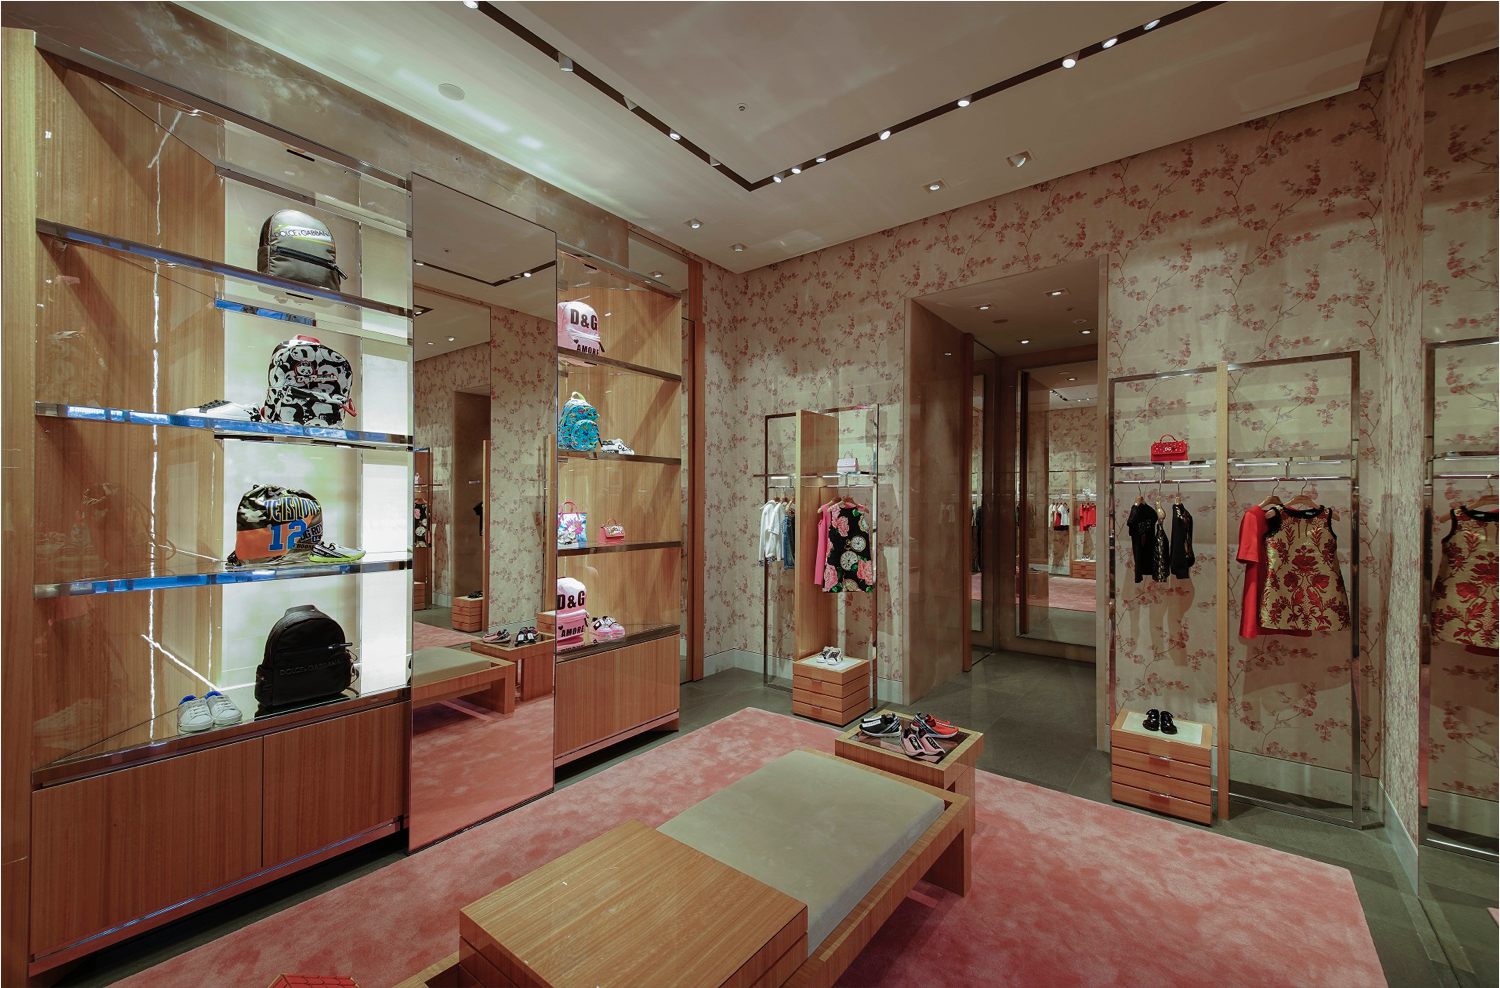 From Louis Vuitton's futuristic Tokyo store to Dolce and Gabbana's